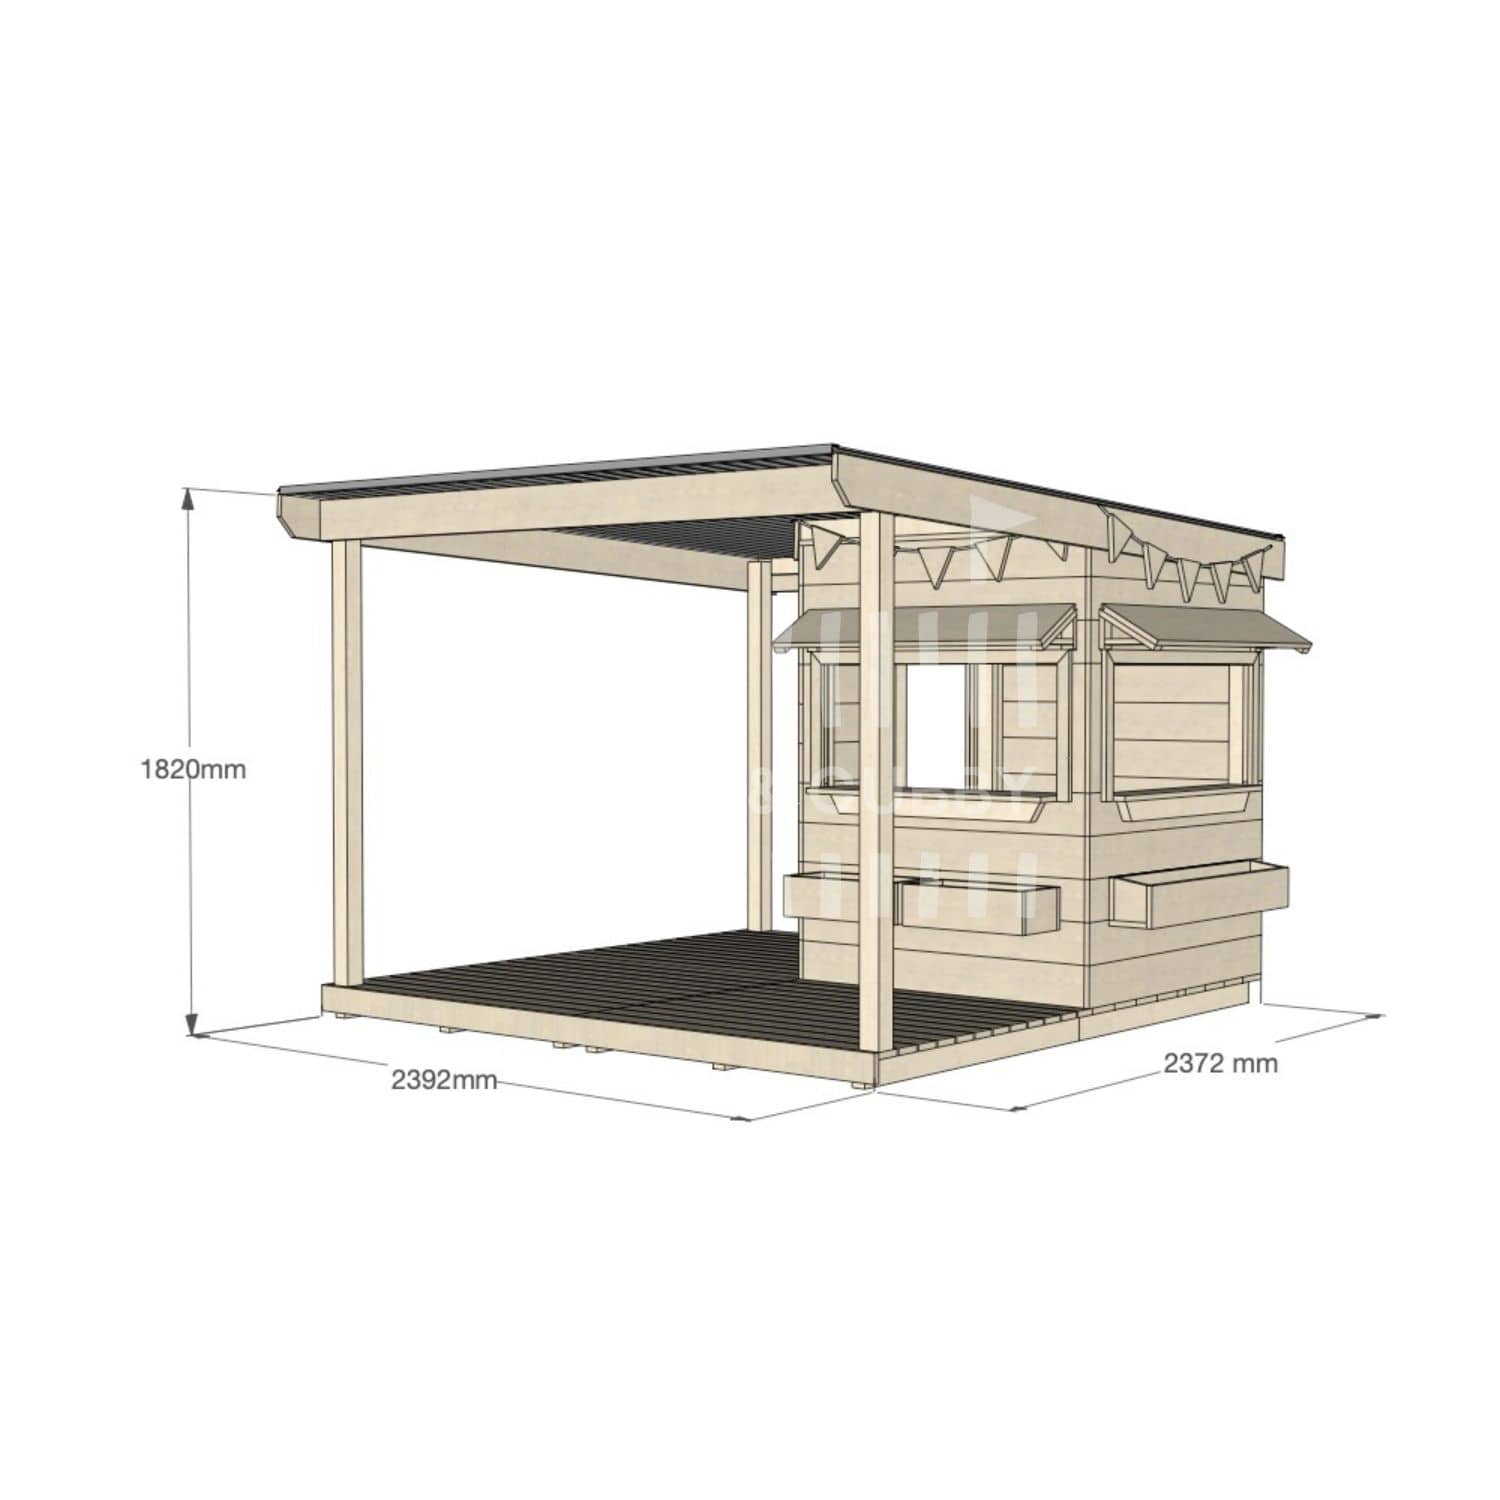 Commercial grade little square pine timber cubby house with wraparound verandah, accessories and dimensions